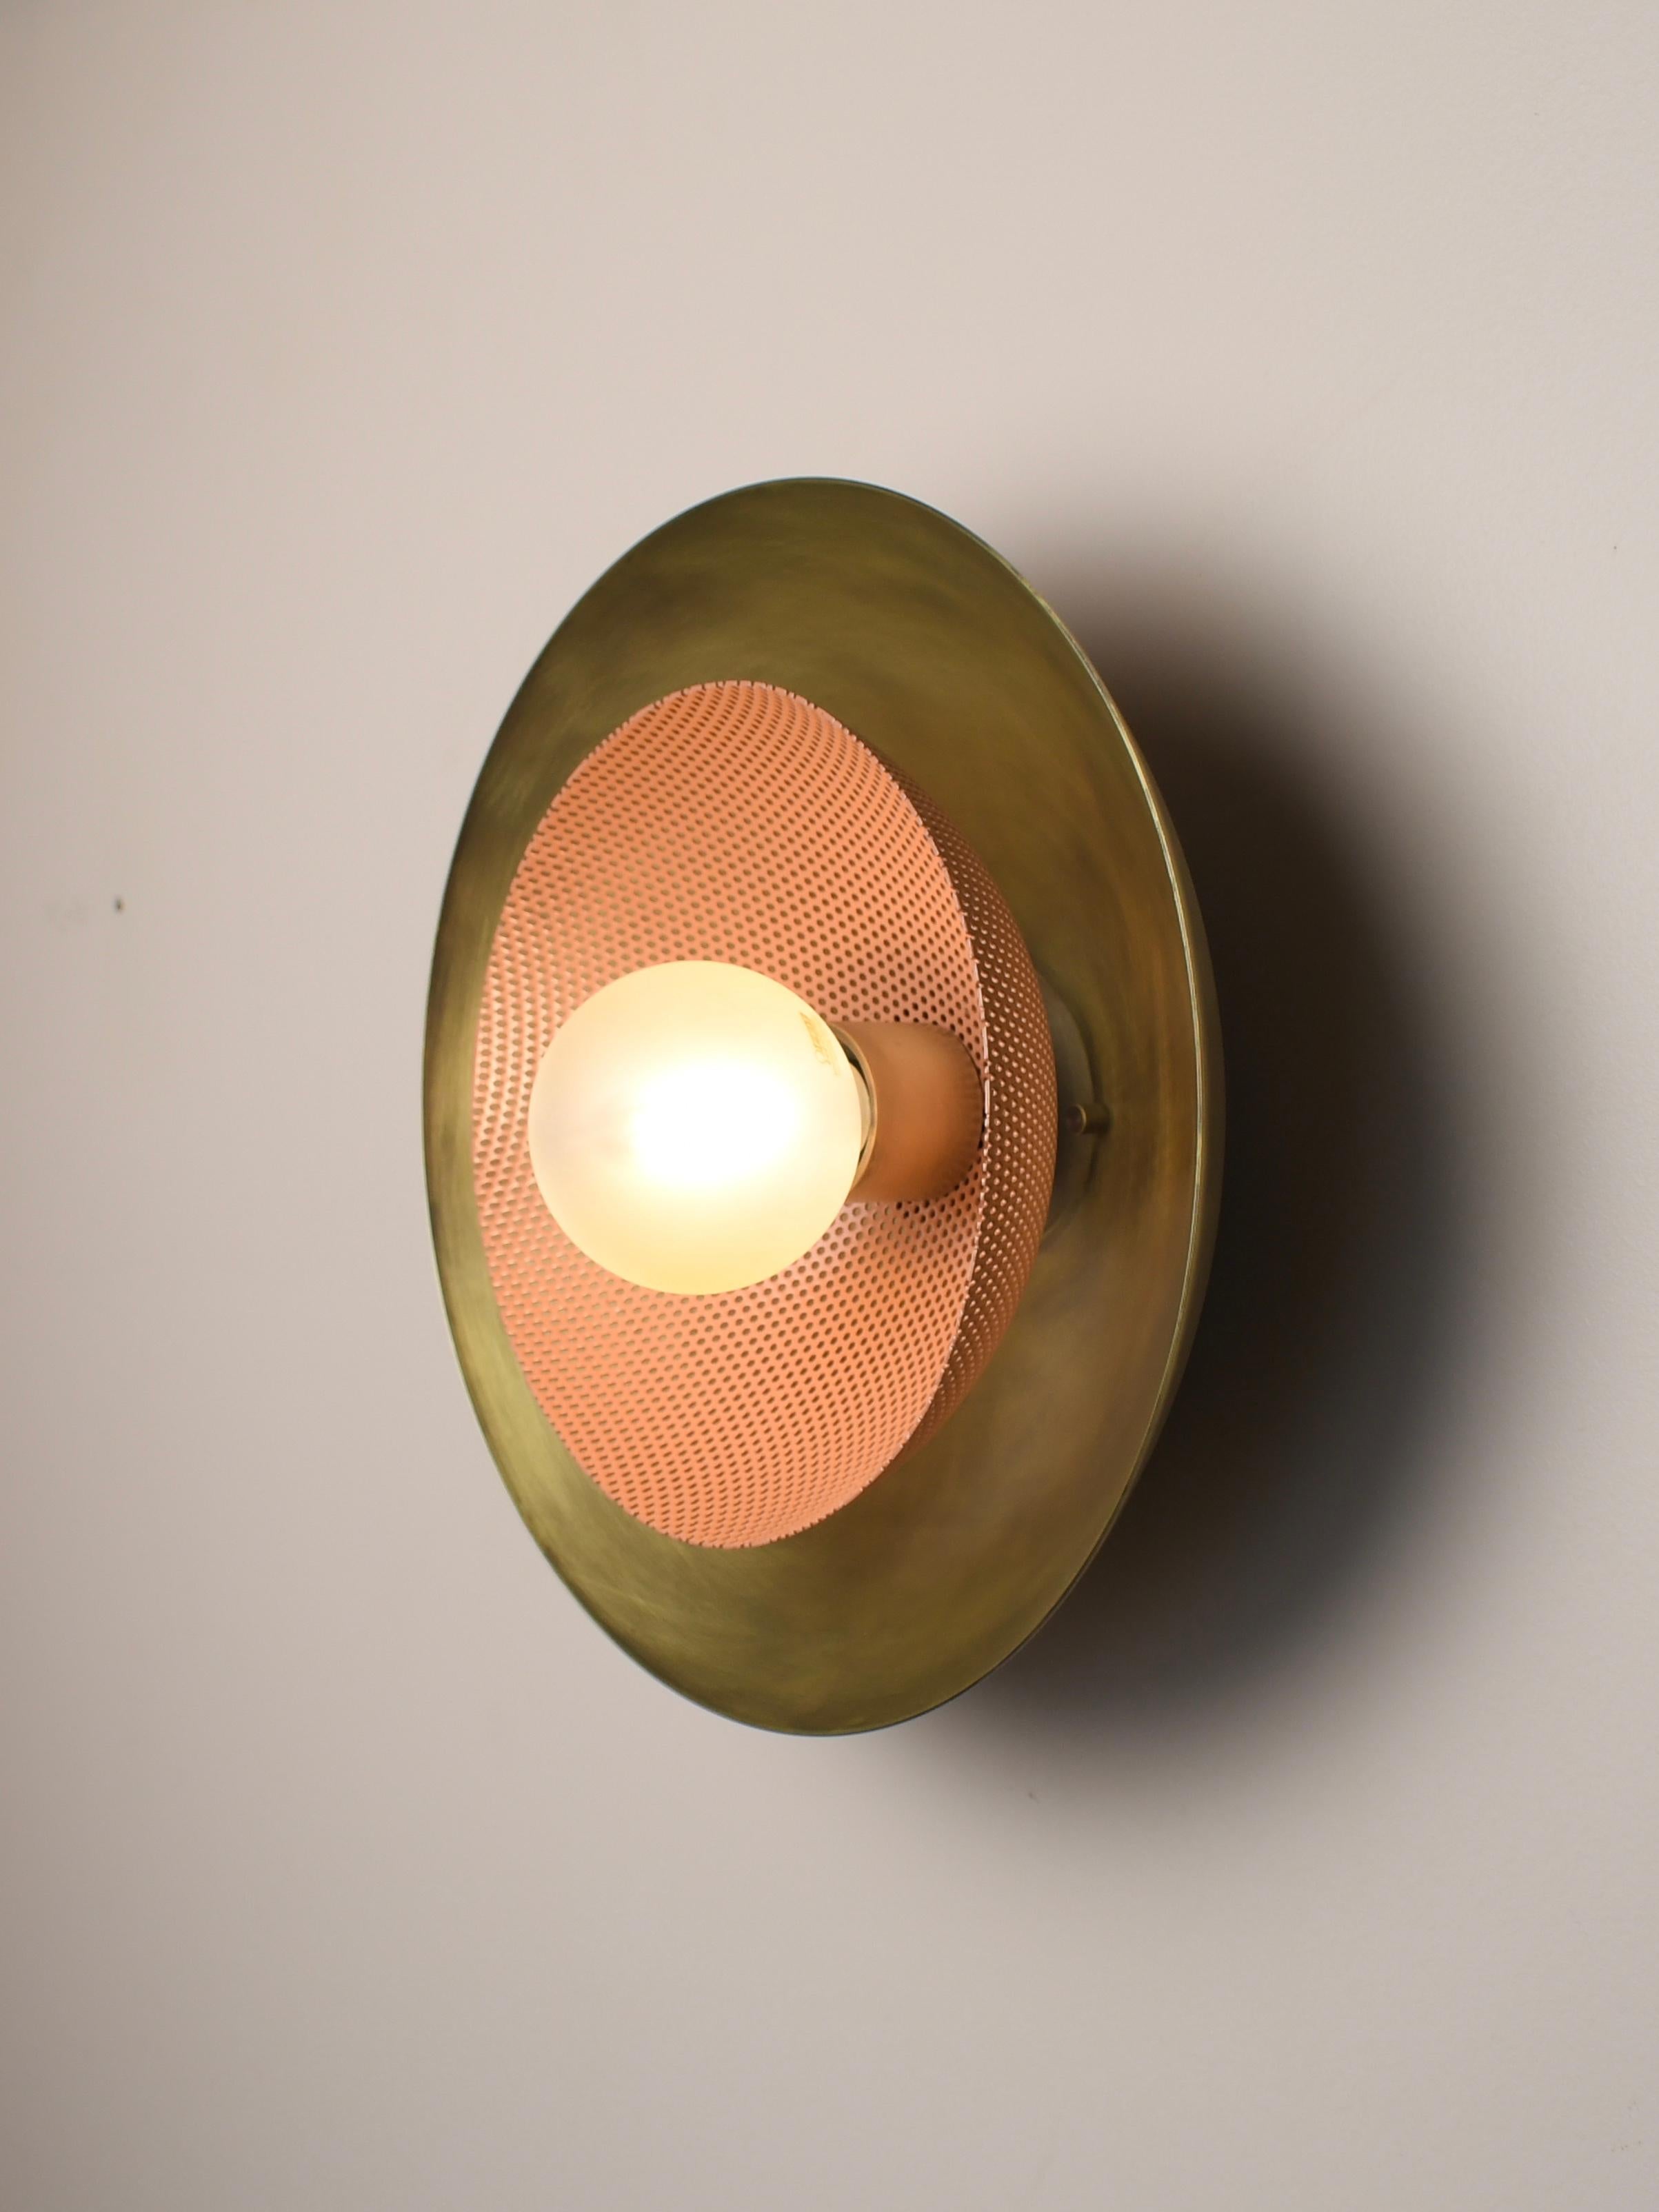 The centric wall sconce is a stately take on French modernism, featuring a spun metal mesh shade nestled into a large solid brass bowl. Part of our axial family of products, the centric wall sconce is a substantial, handsome piece that works well in